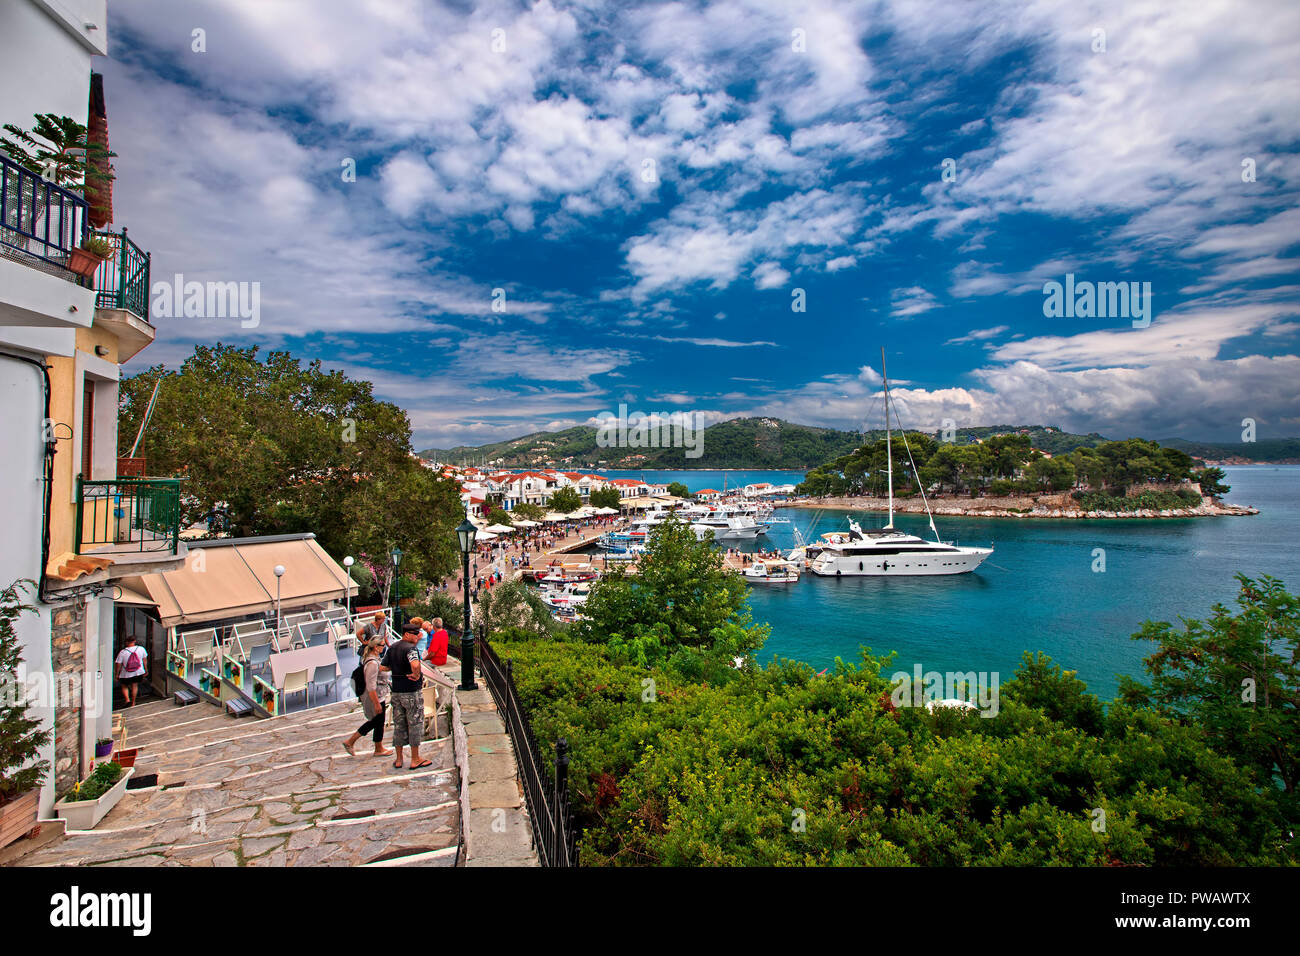 View of the Old Port of Skiathos town, Skiathos island, Northern Sporades, Greece. To the right of the photo you can see the Bourtzi castle. Stock Photo